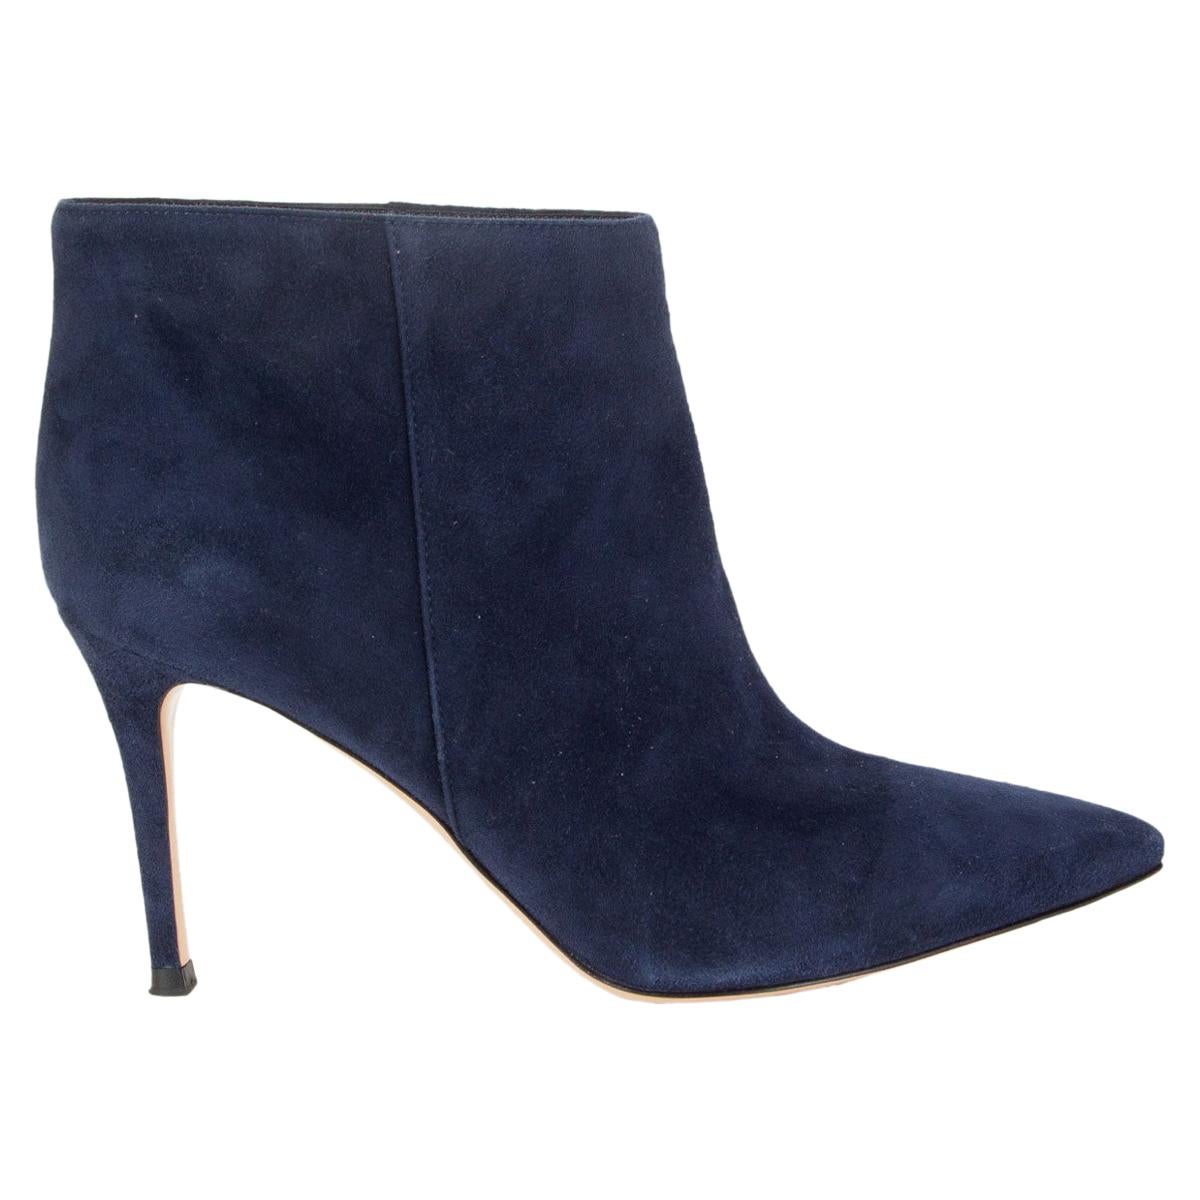 GIANVITO ROSSI navy blue suede STILO Ankle Boots Shoes 36